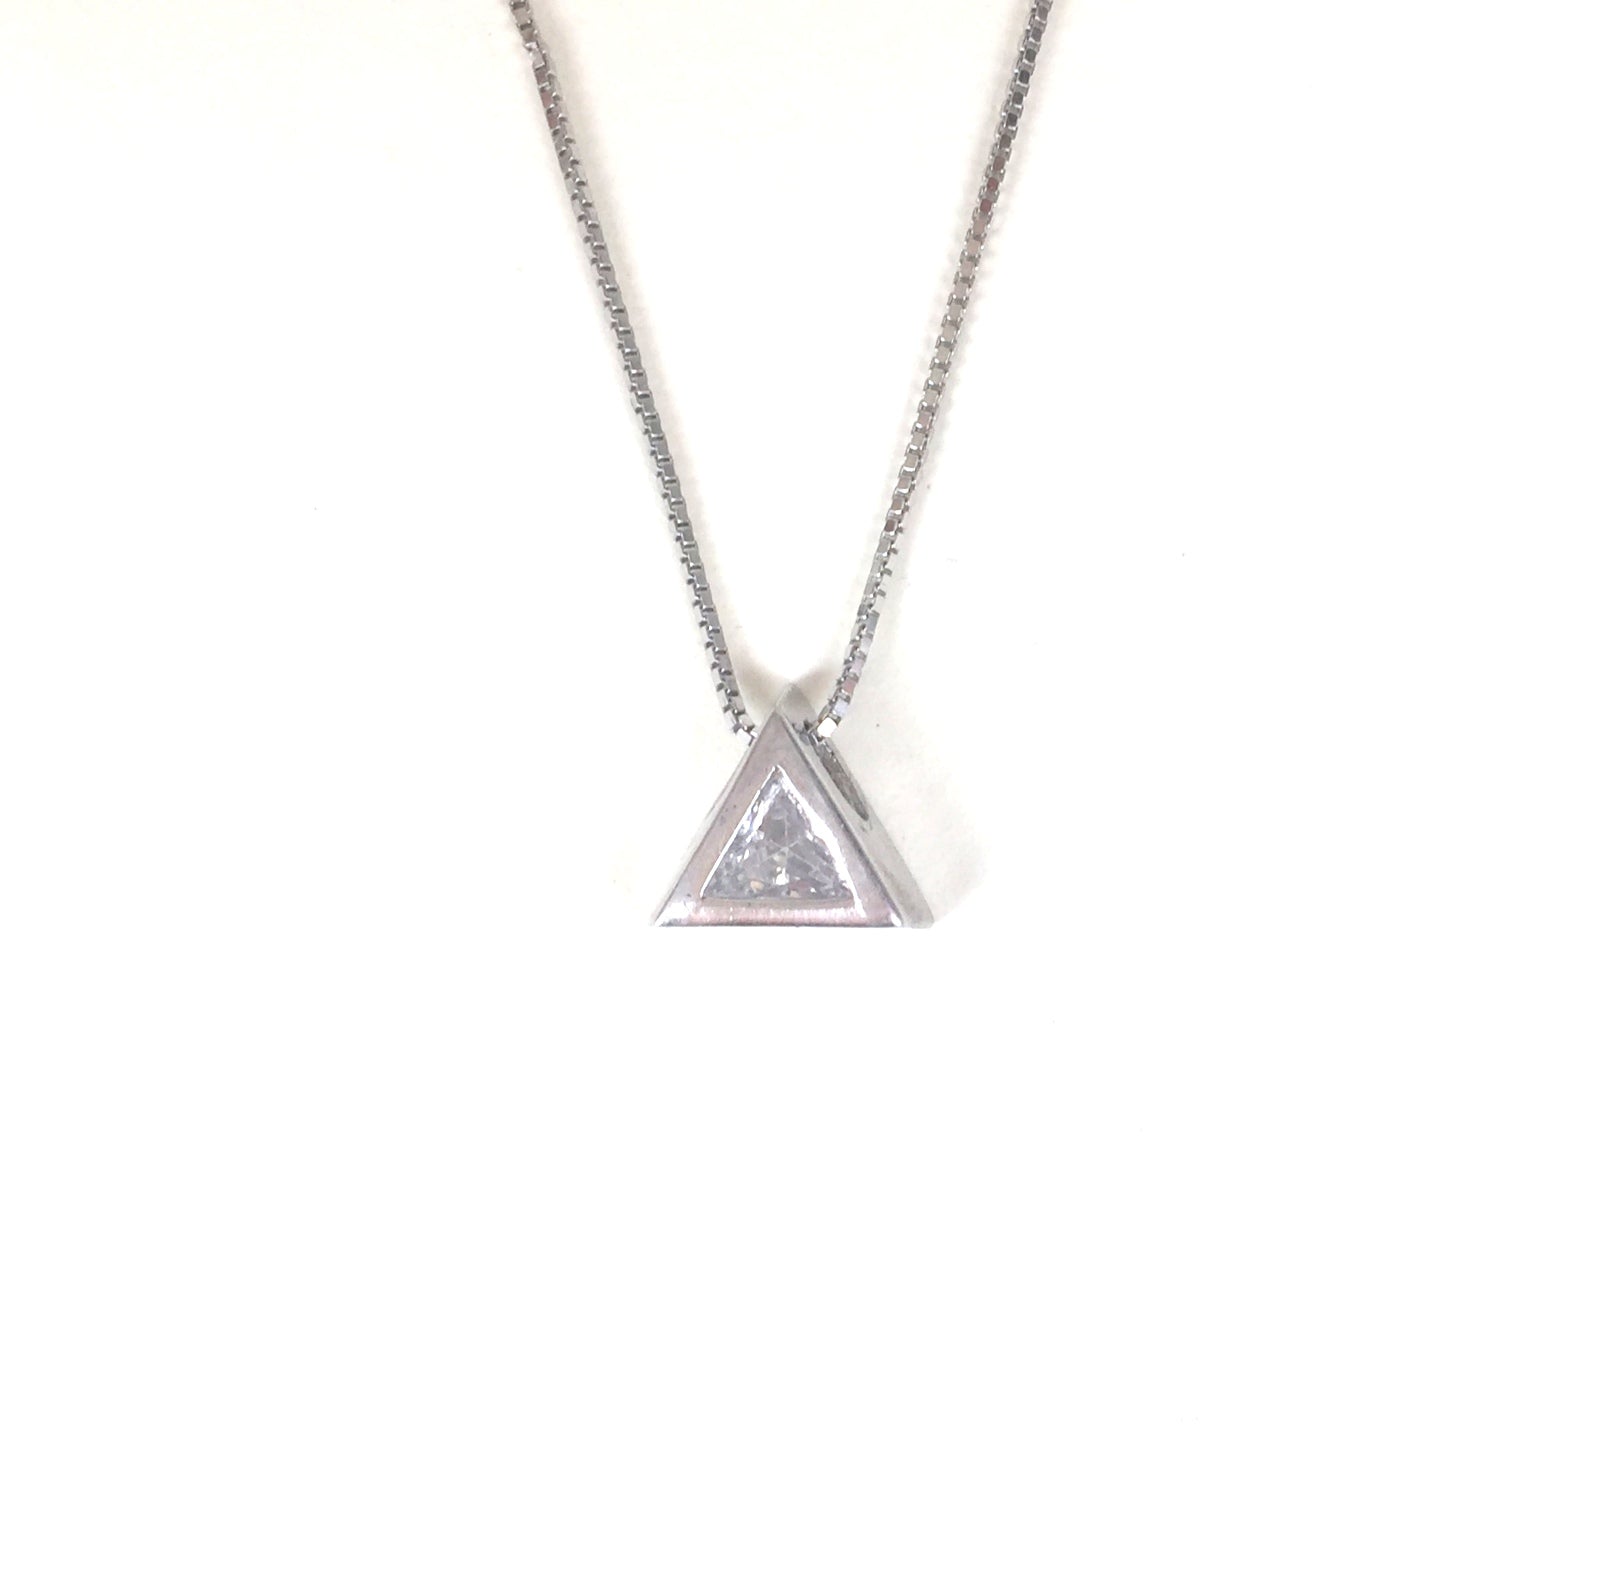 SMALL TRIANGLE STERLING SILVER NECKLACE